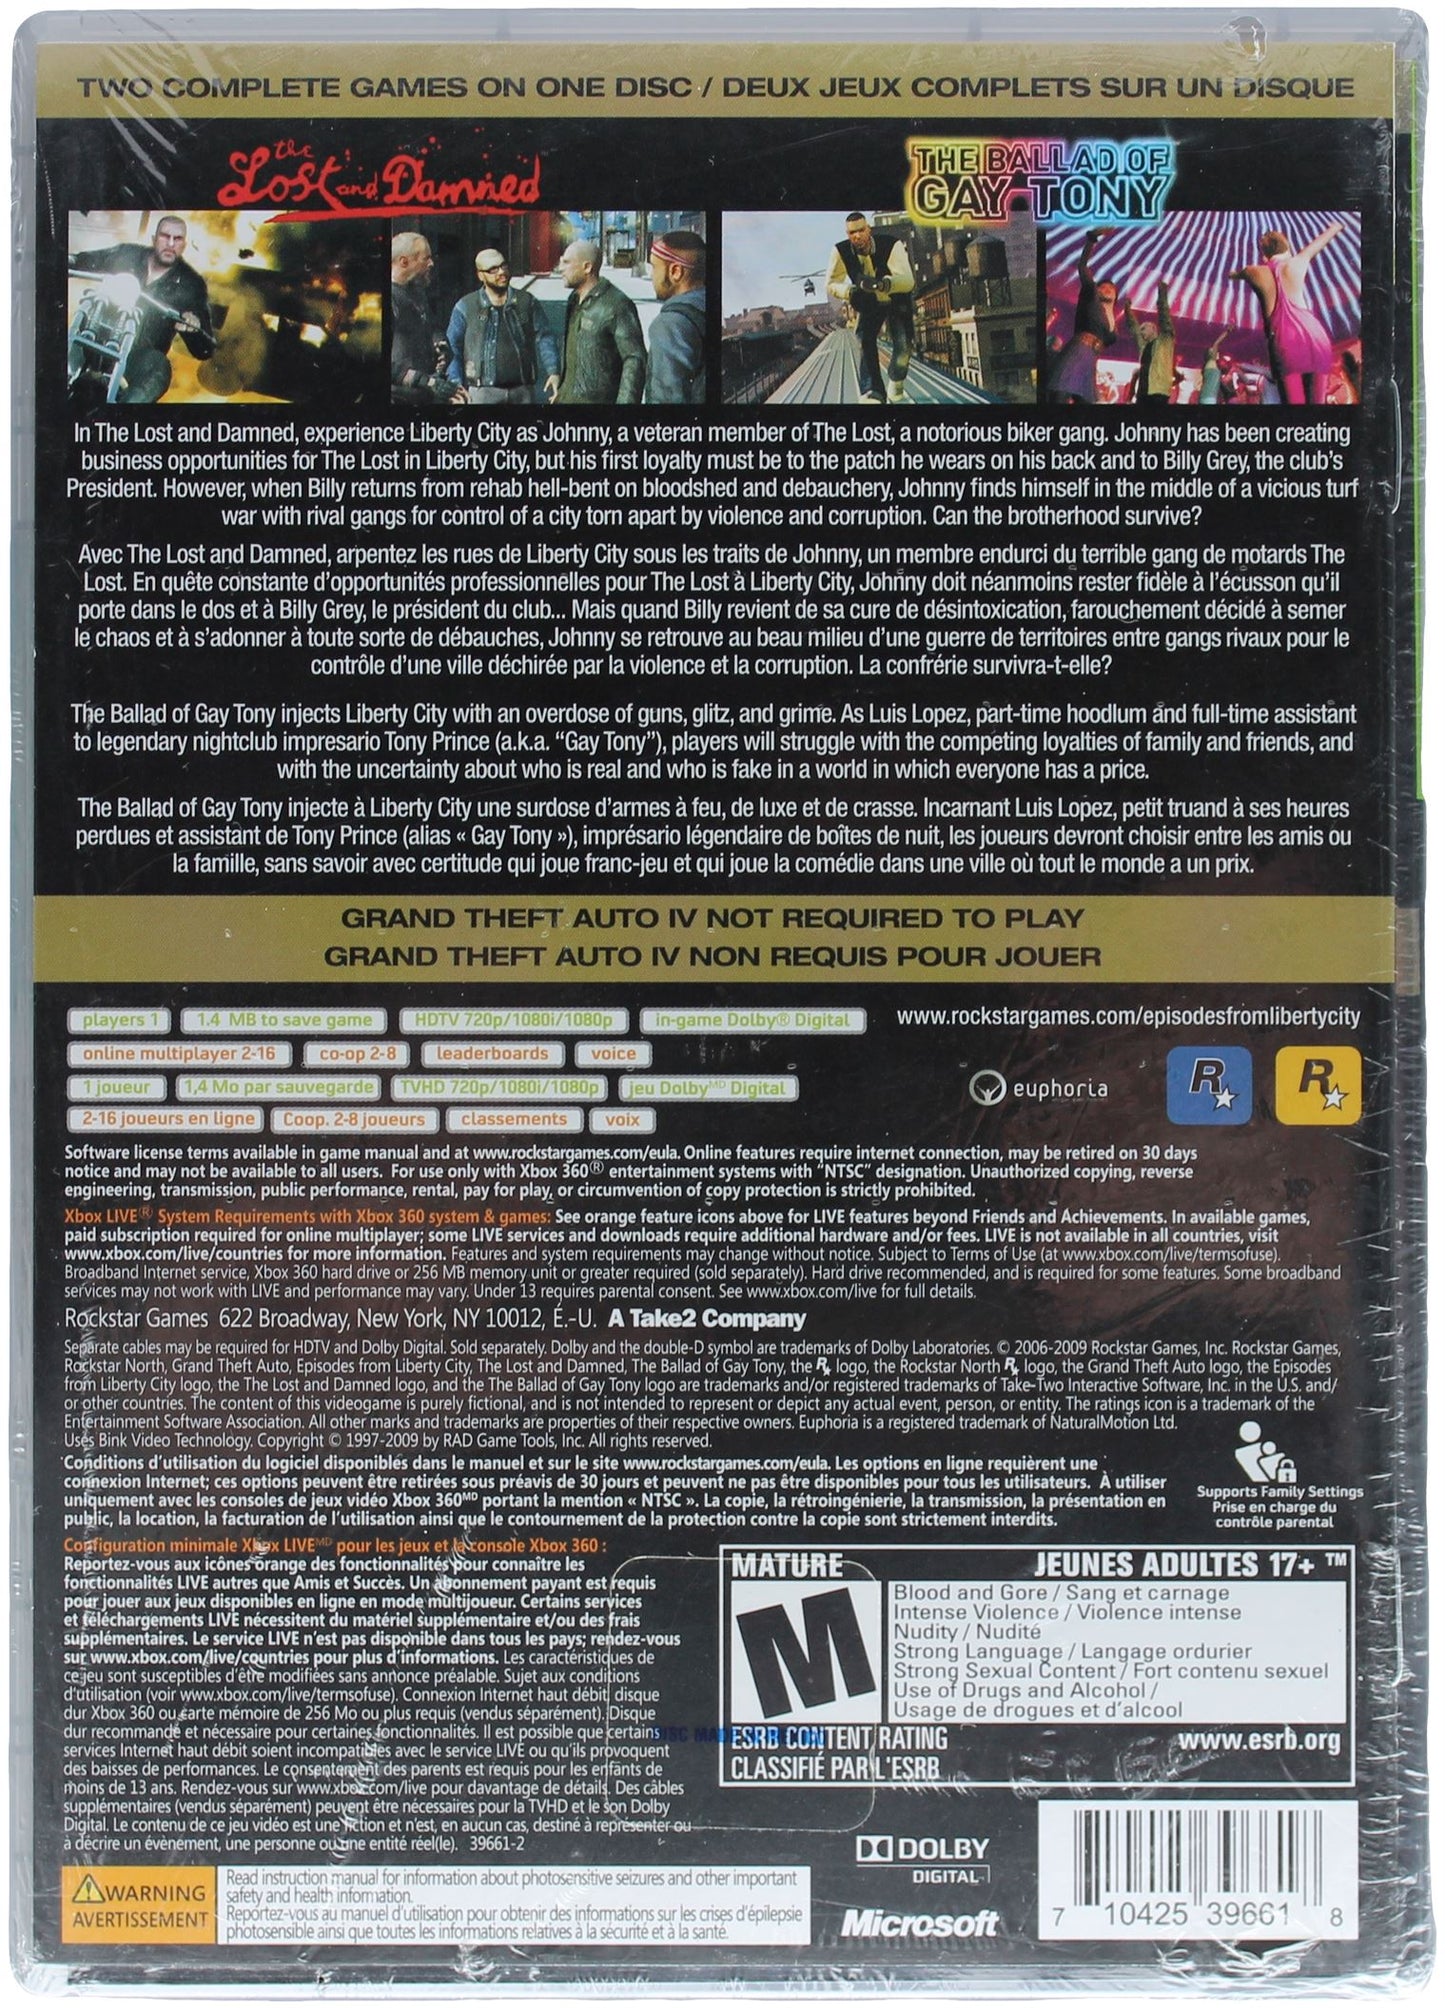 Grand Theft Auto: Episodes From Liberty City [Platinum Hits] - Sealed